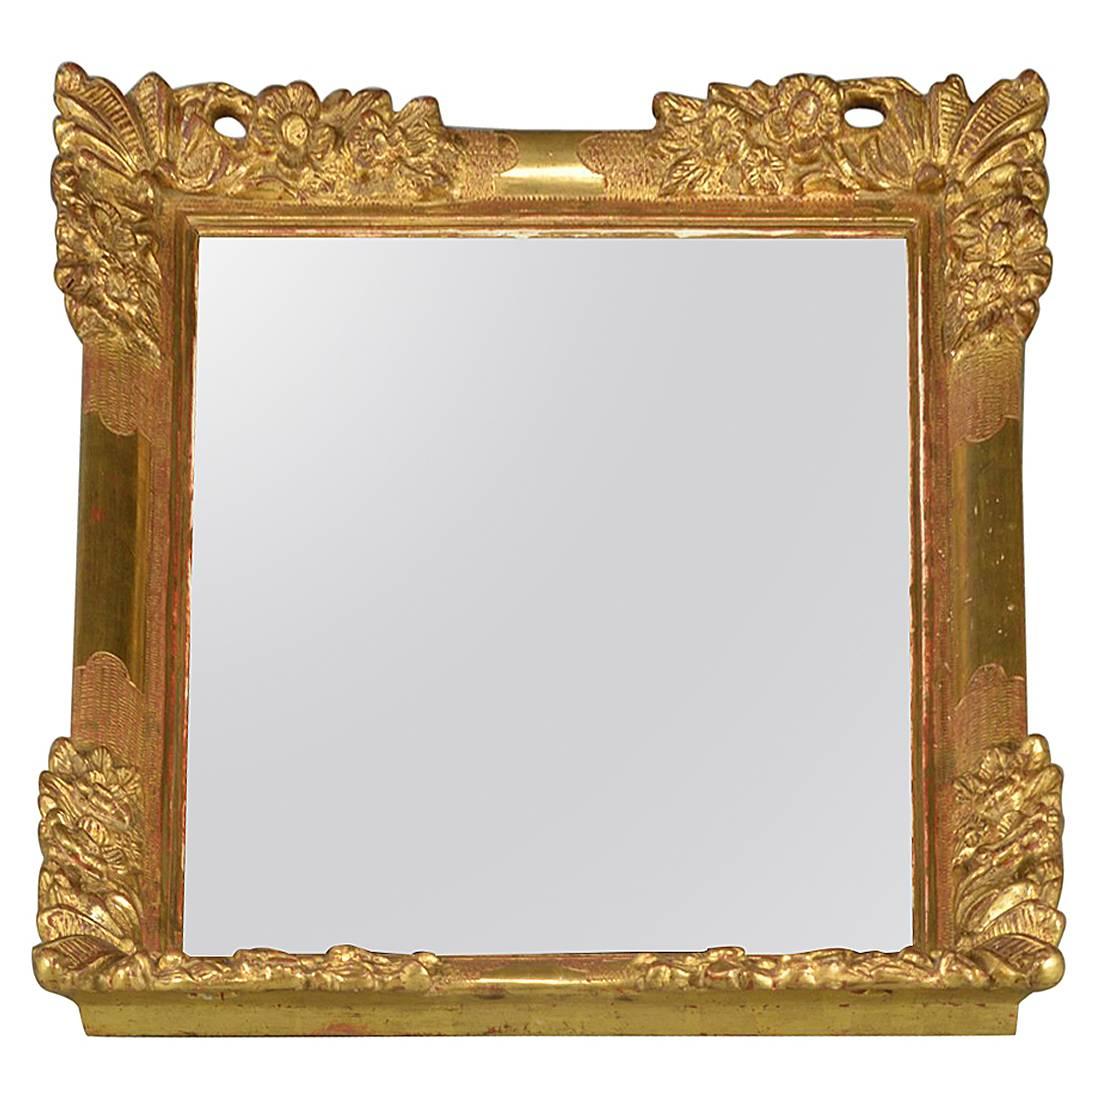 Mirror with Gold-Plated Wood Frame and Flowers Decor